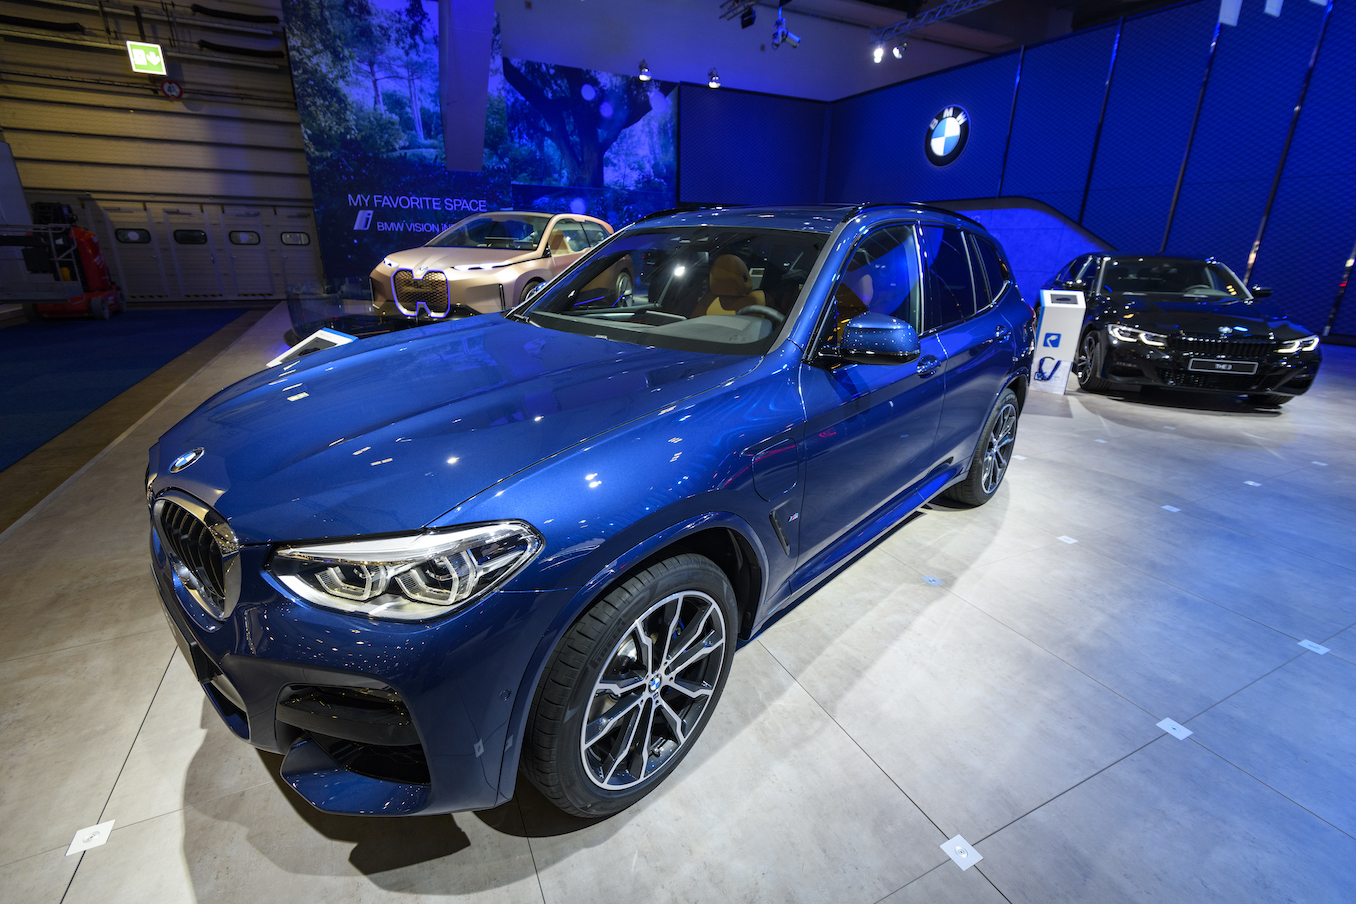 BMW X3 compact luxury SUV on display at Brussels Expo